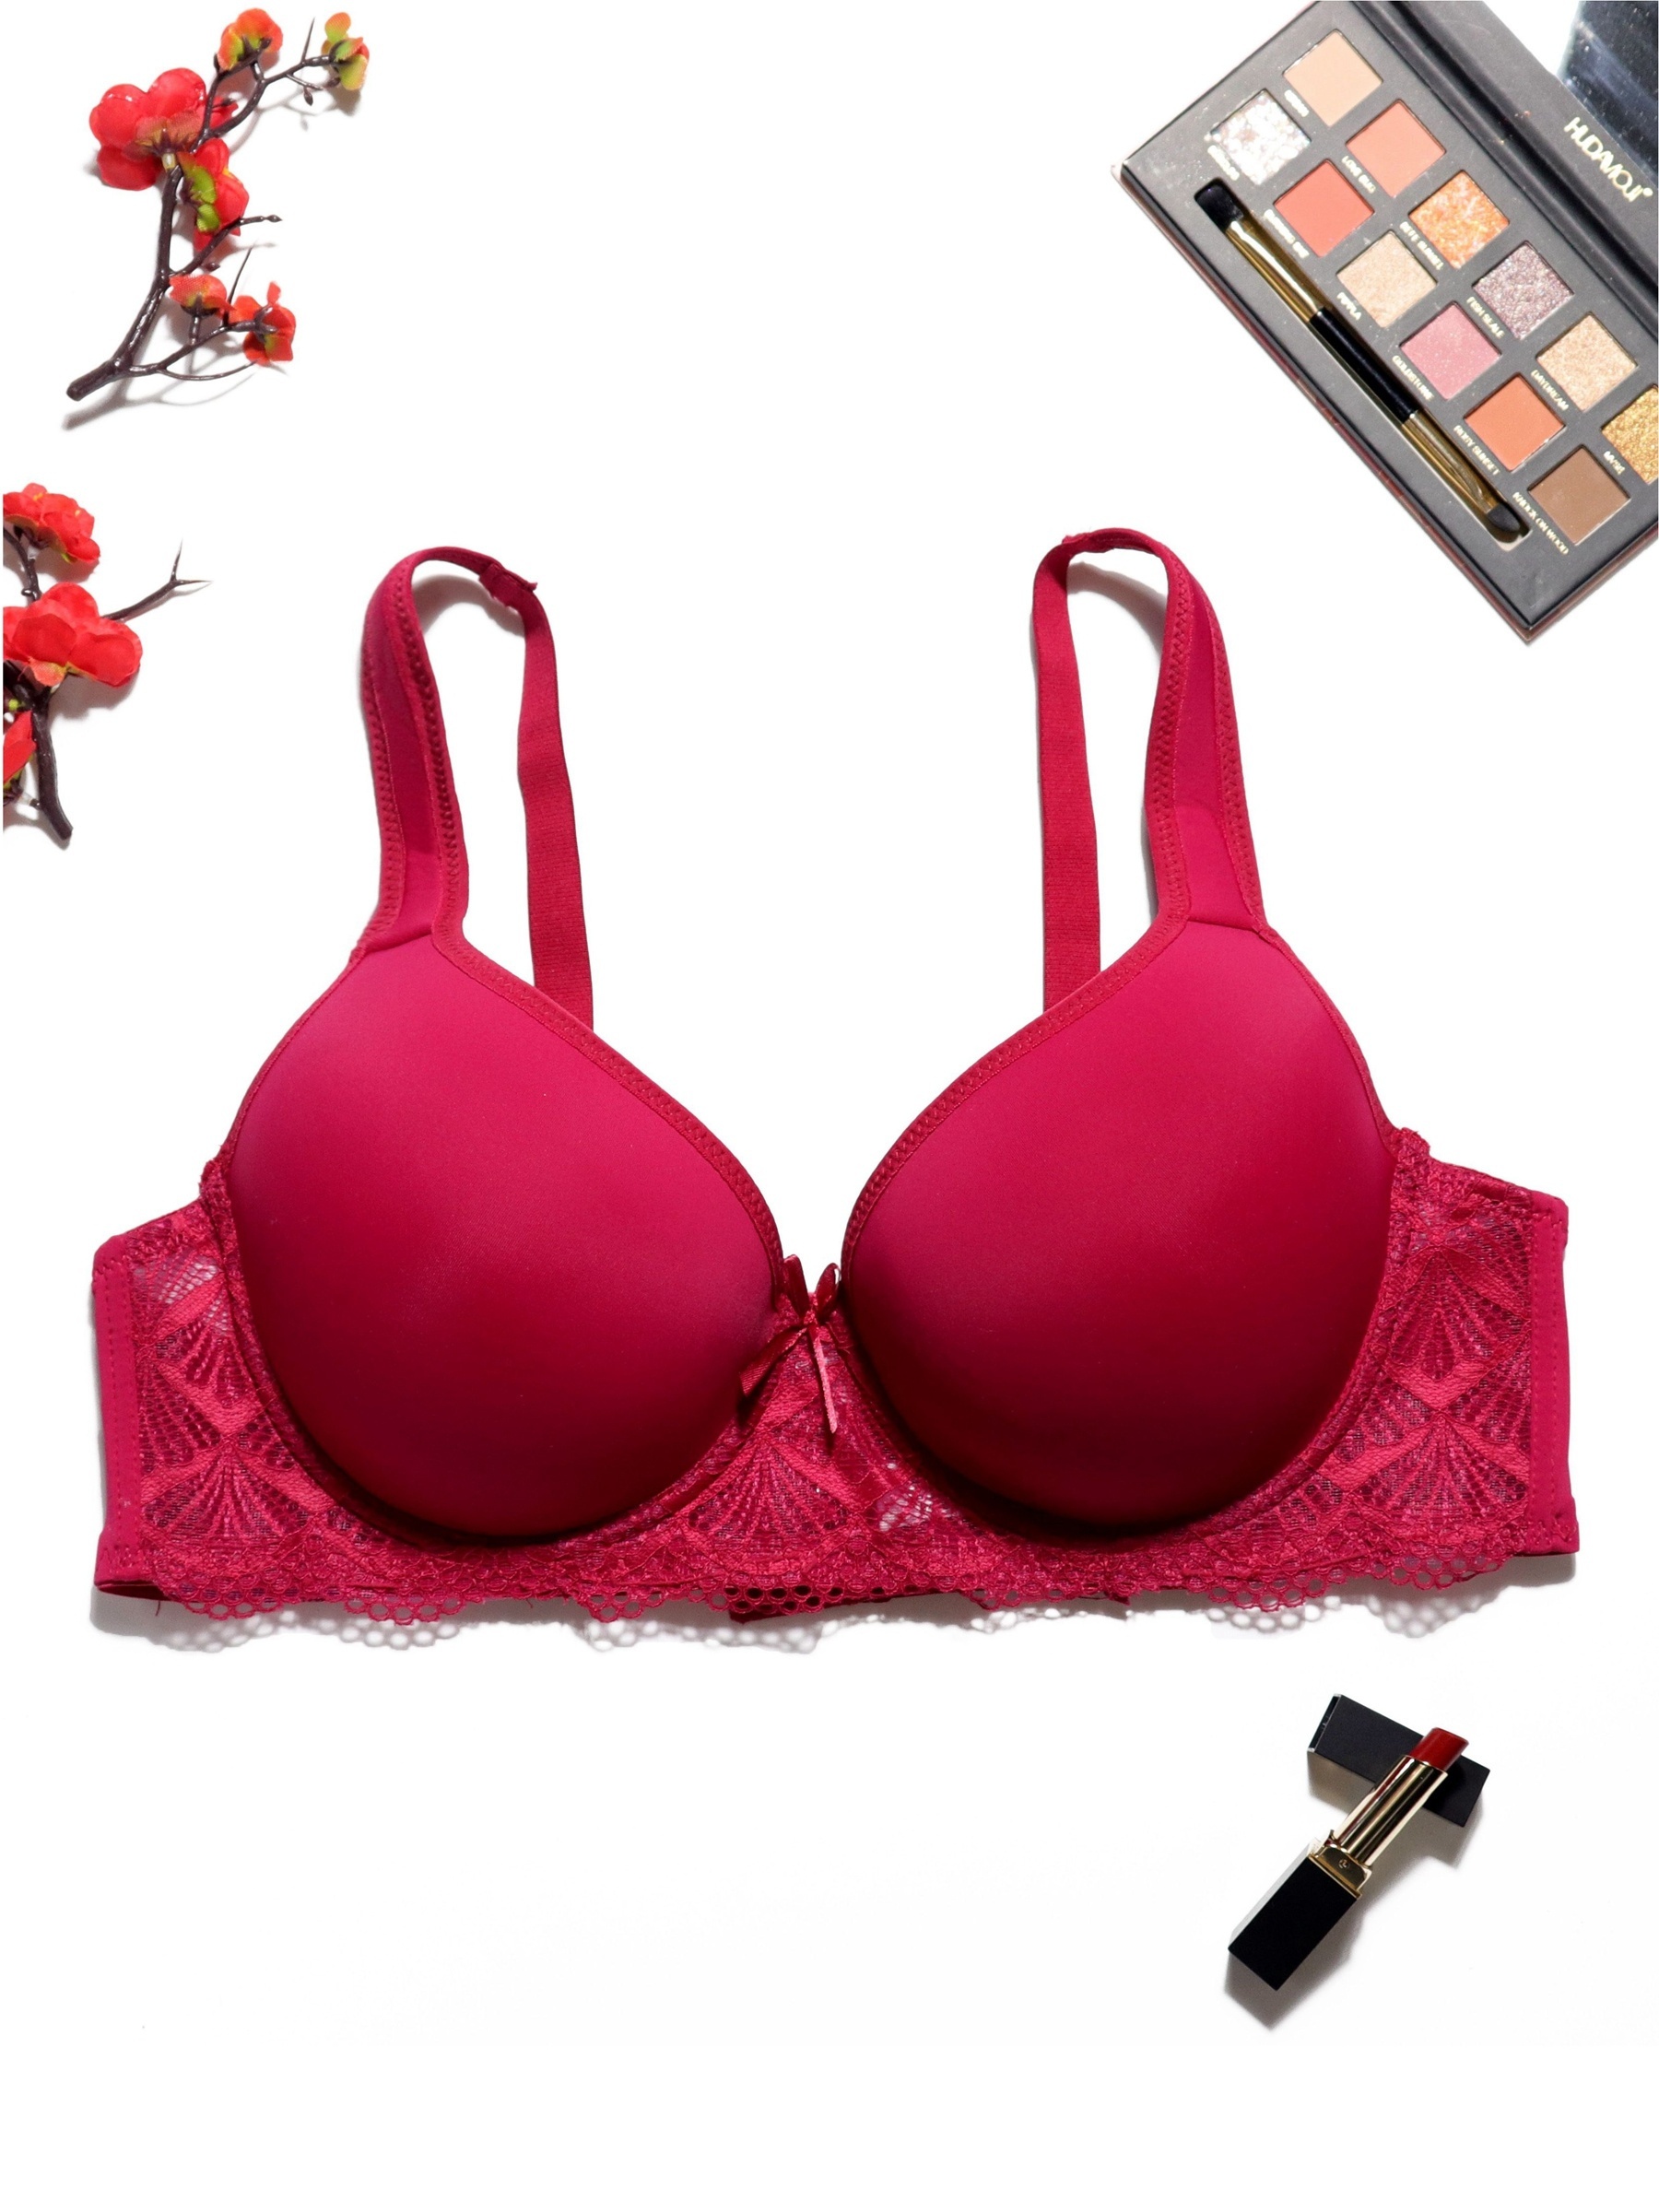 Molded Cup Bra with Lace Inset